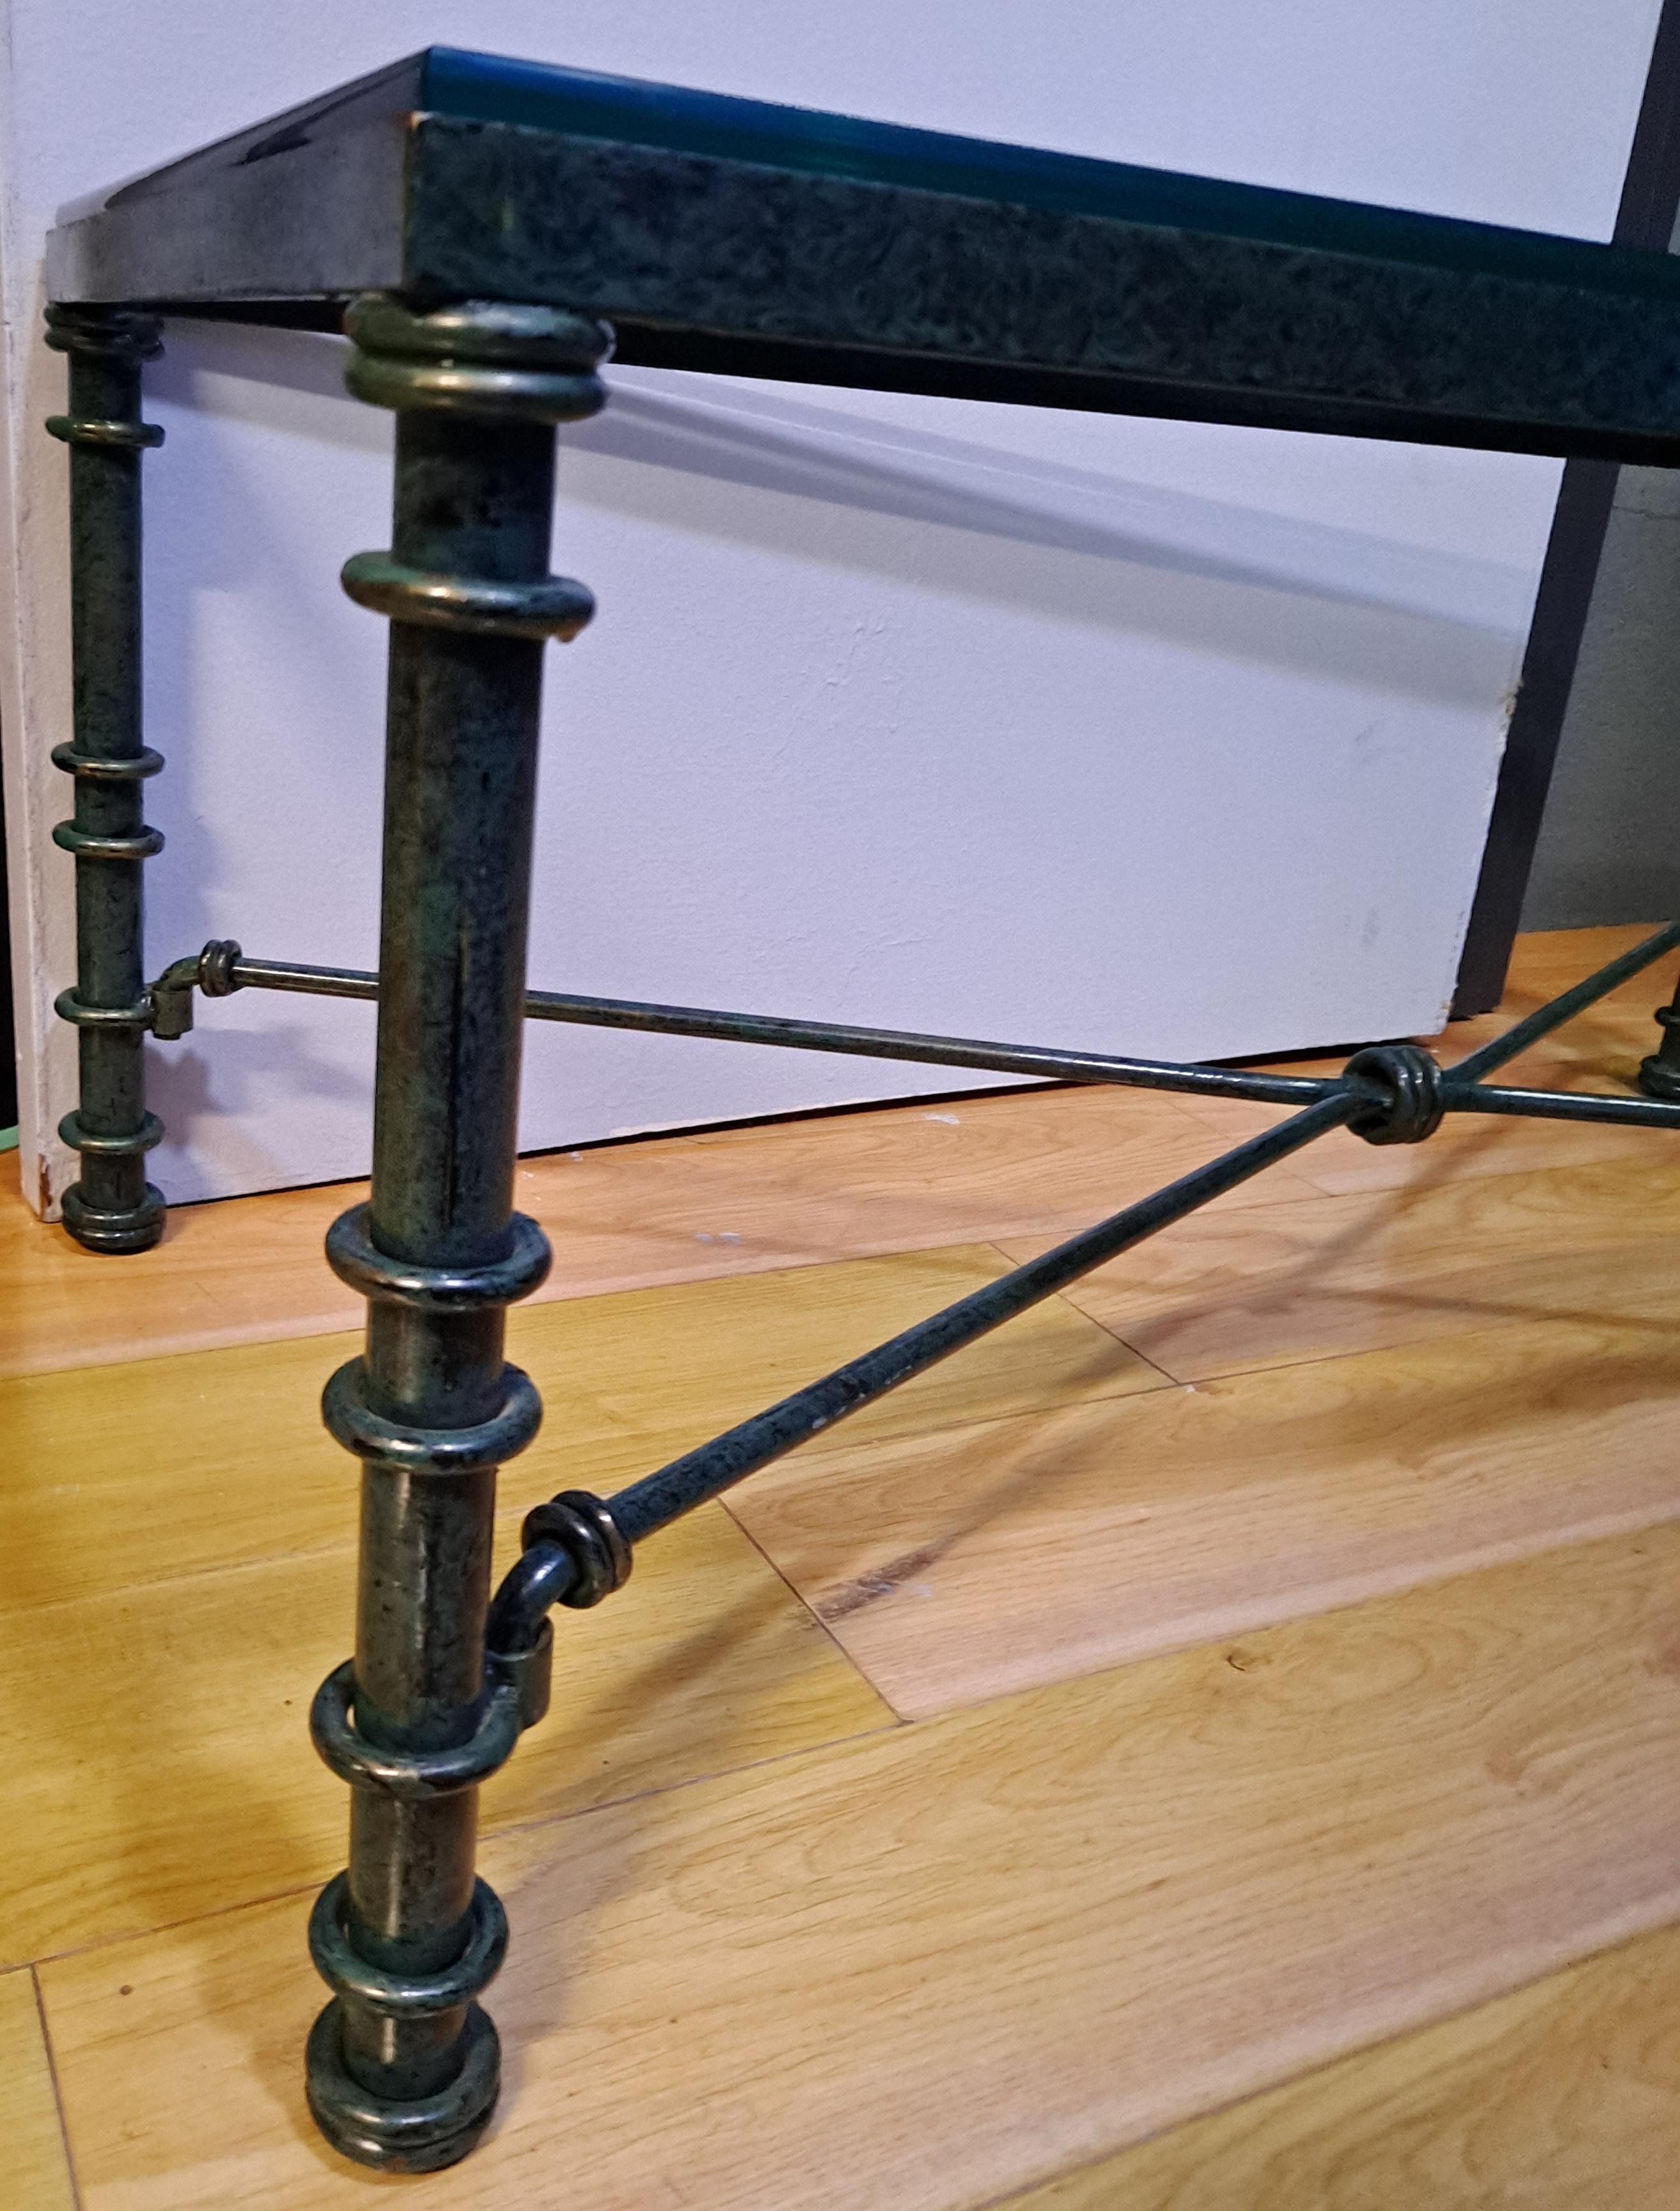 Giacometti-Style Iron Coffee Table With Verdigris Finish and Glass Top

There is a chip on one of the corners of the glass and a small crack on opposite corner

40 x 20 x 16.5